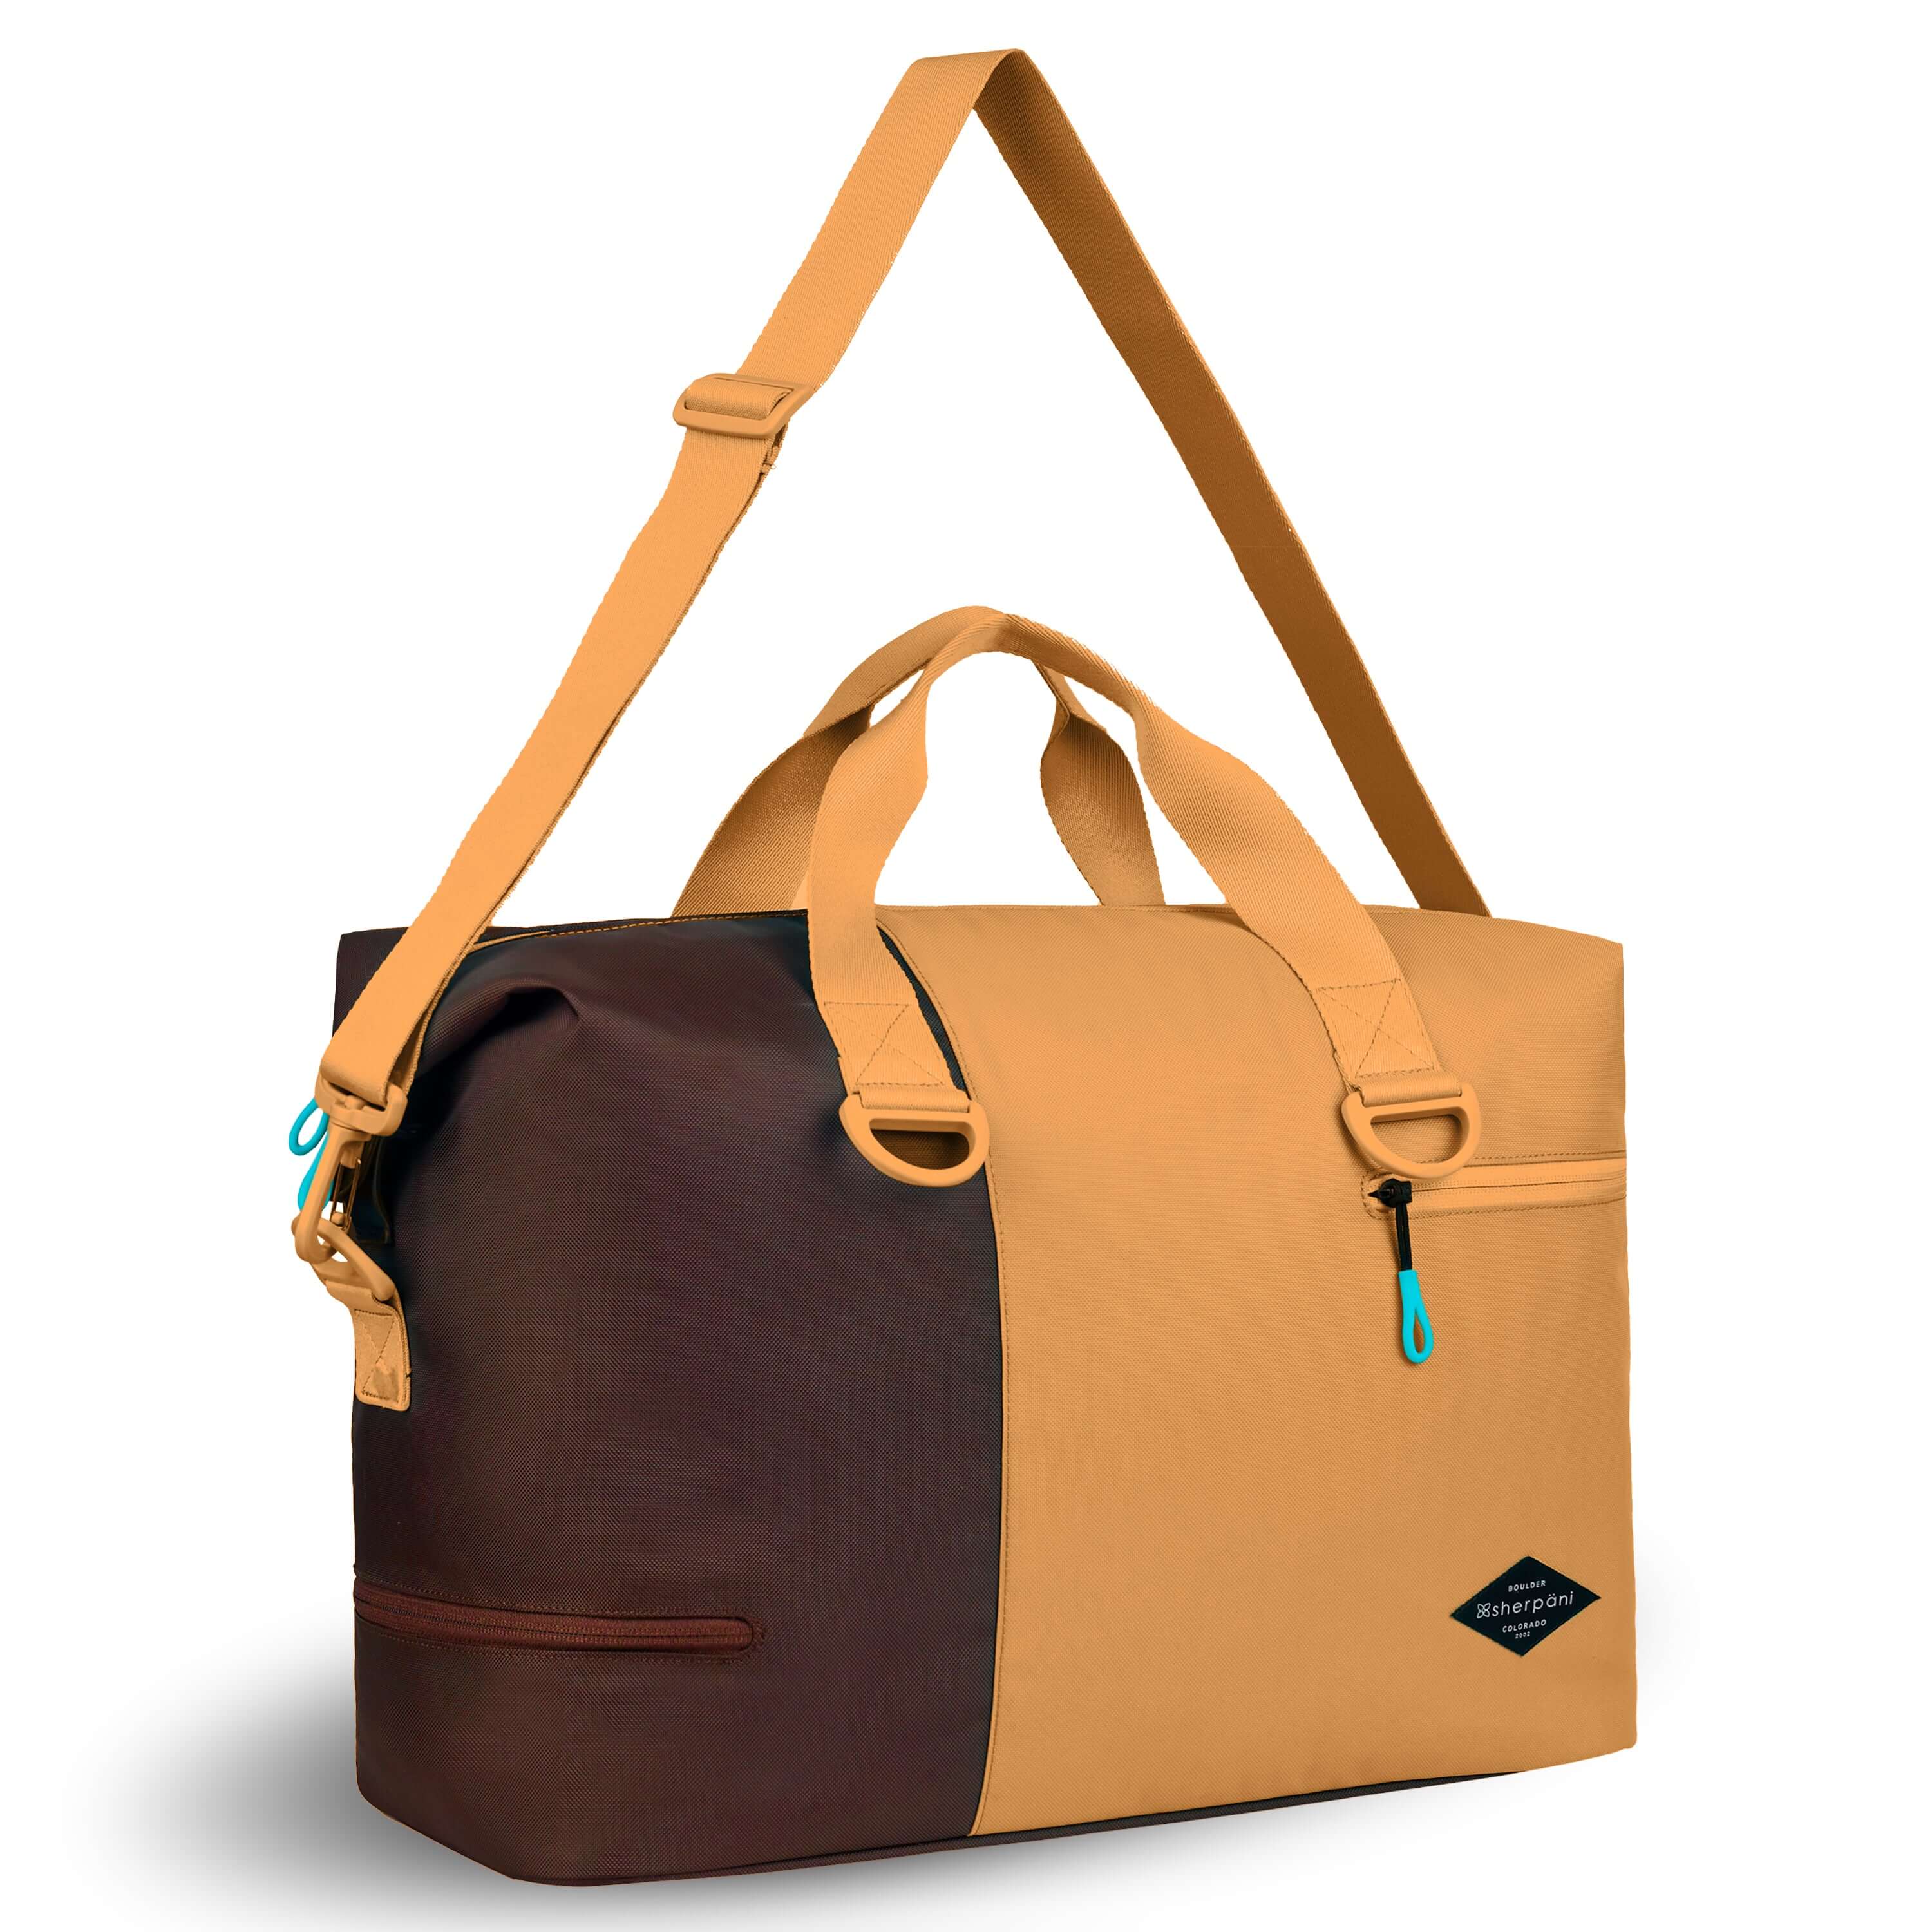 Angled front view of Sherpani bag, the Sola in Sundial. The bag is two-toned in burnt yellow and brown. Two external zipper compartments are visible on the top right and bottom left of the bag. Easy-pull zippers are accented in aqua. The bag has tote handles and an adjustable/detachable crossbody strap. 